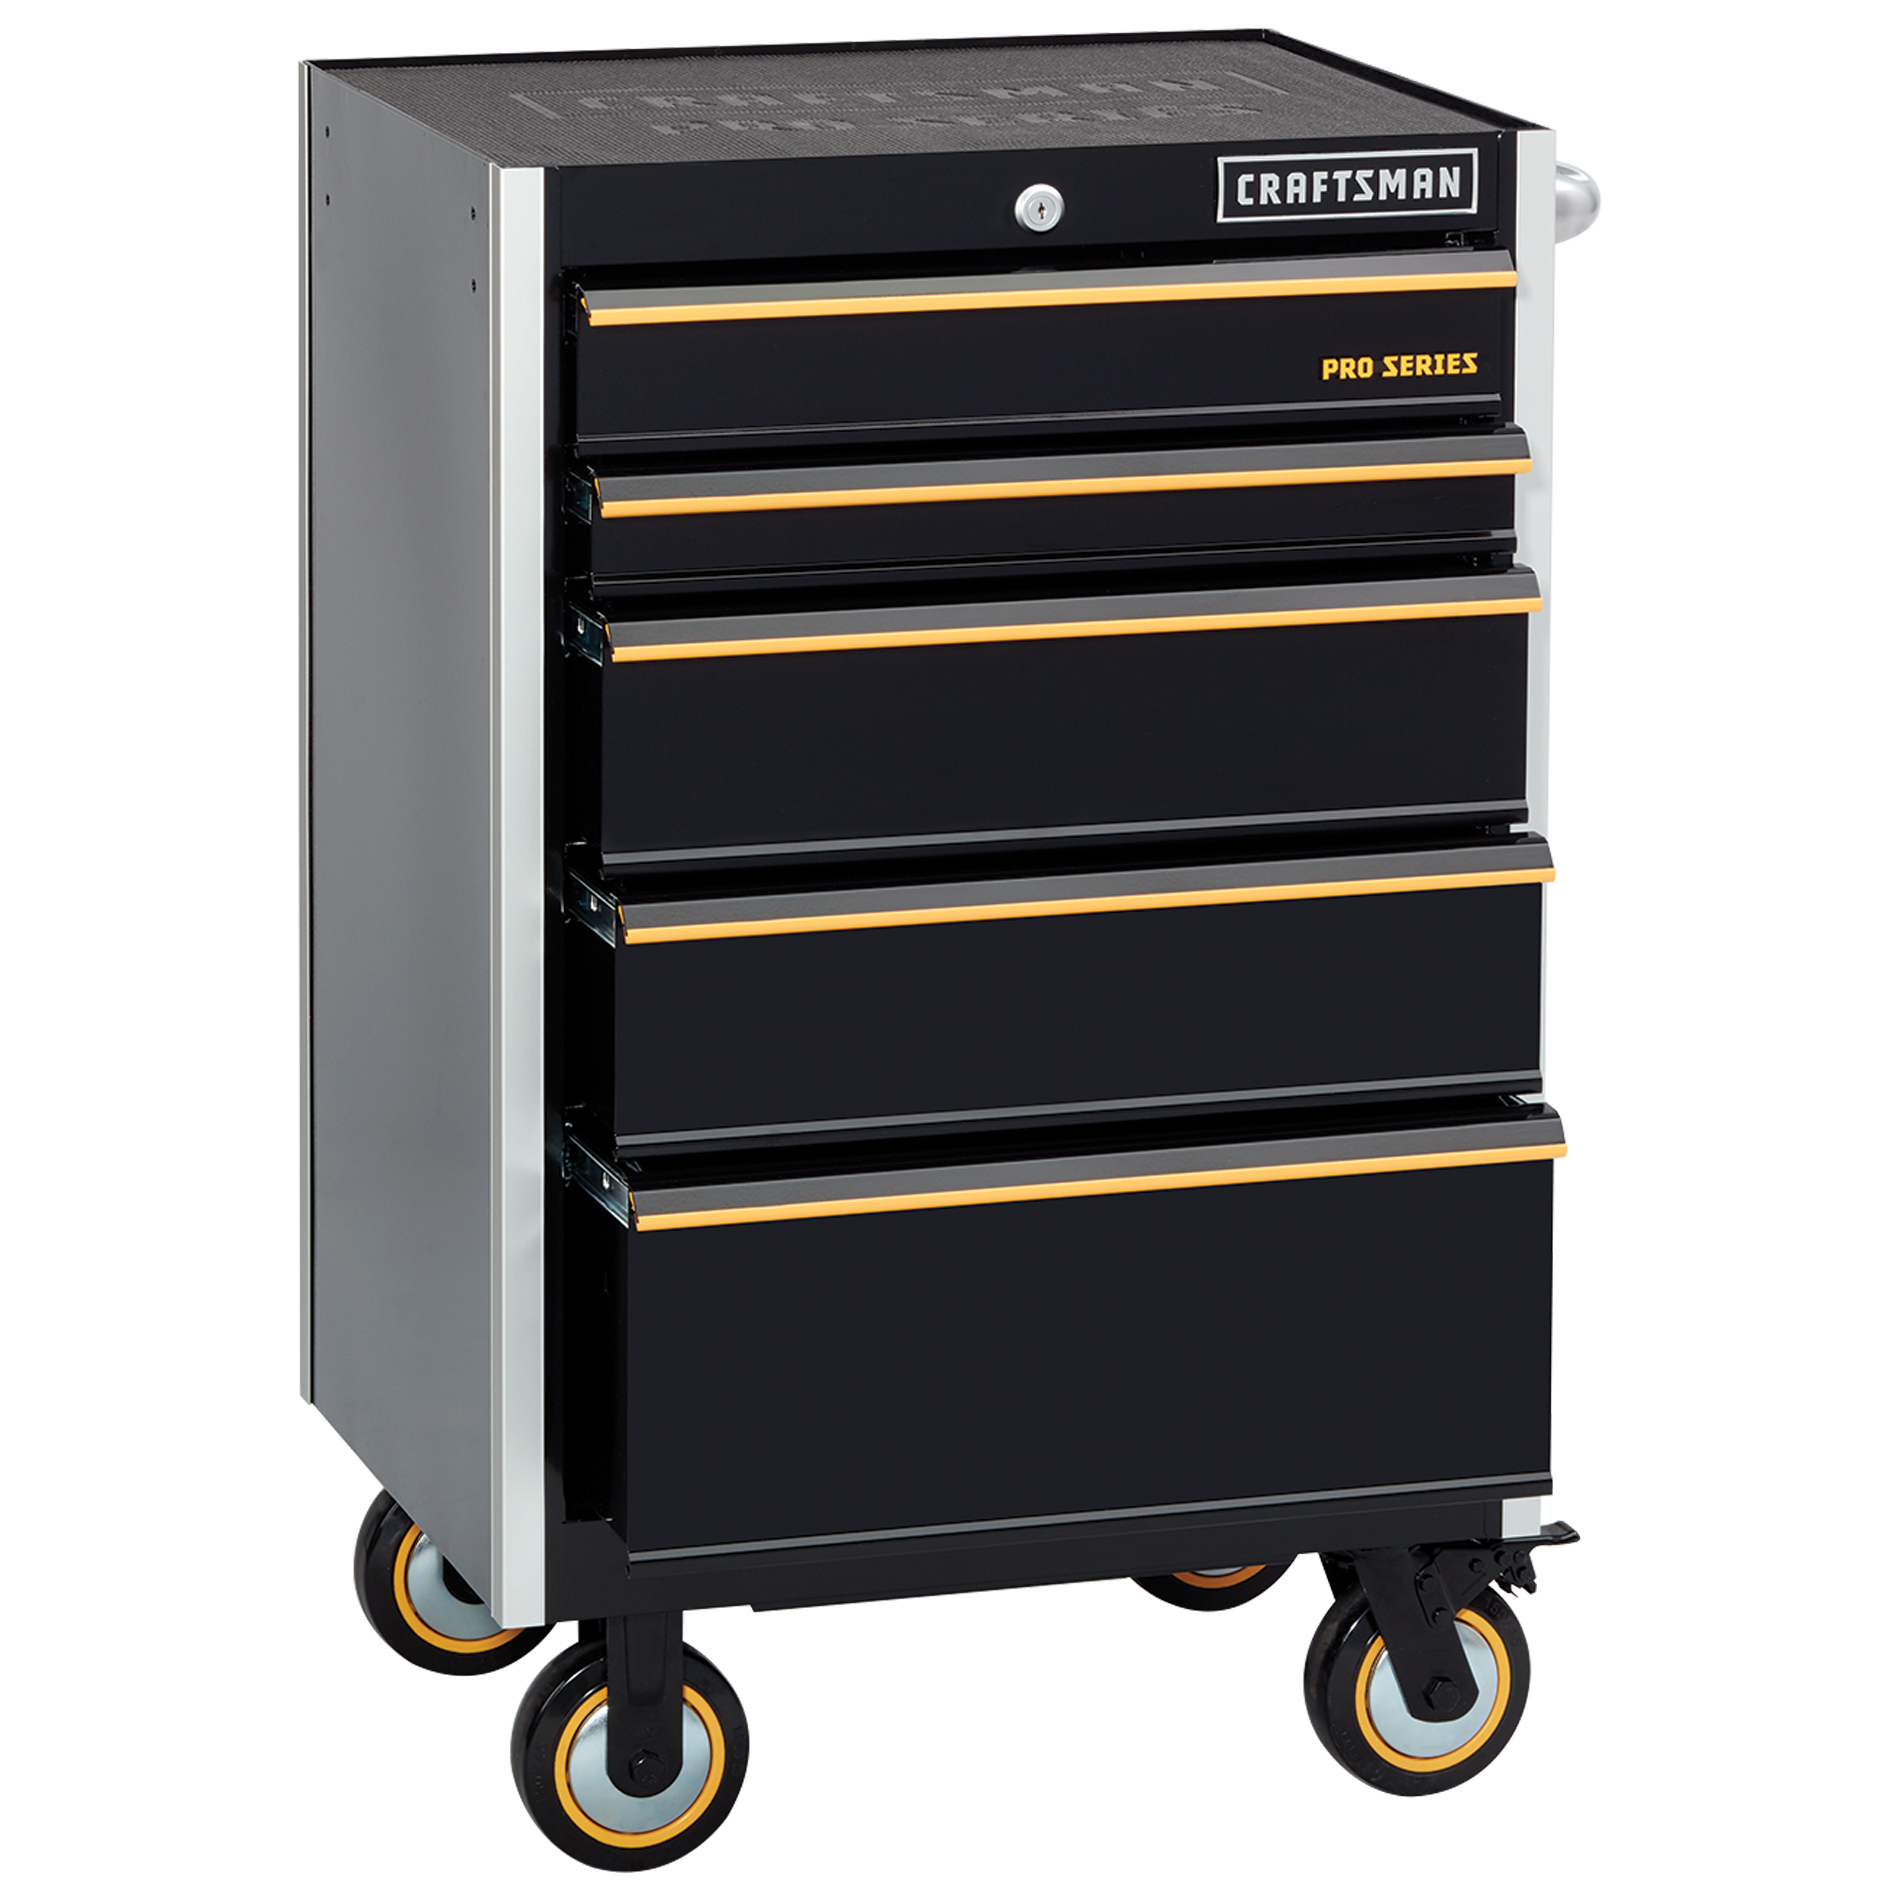 Craftsman Proseries 115821 26 5 Drawer Rolling Tool Chest